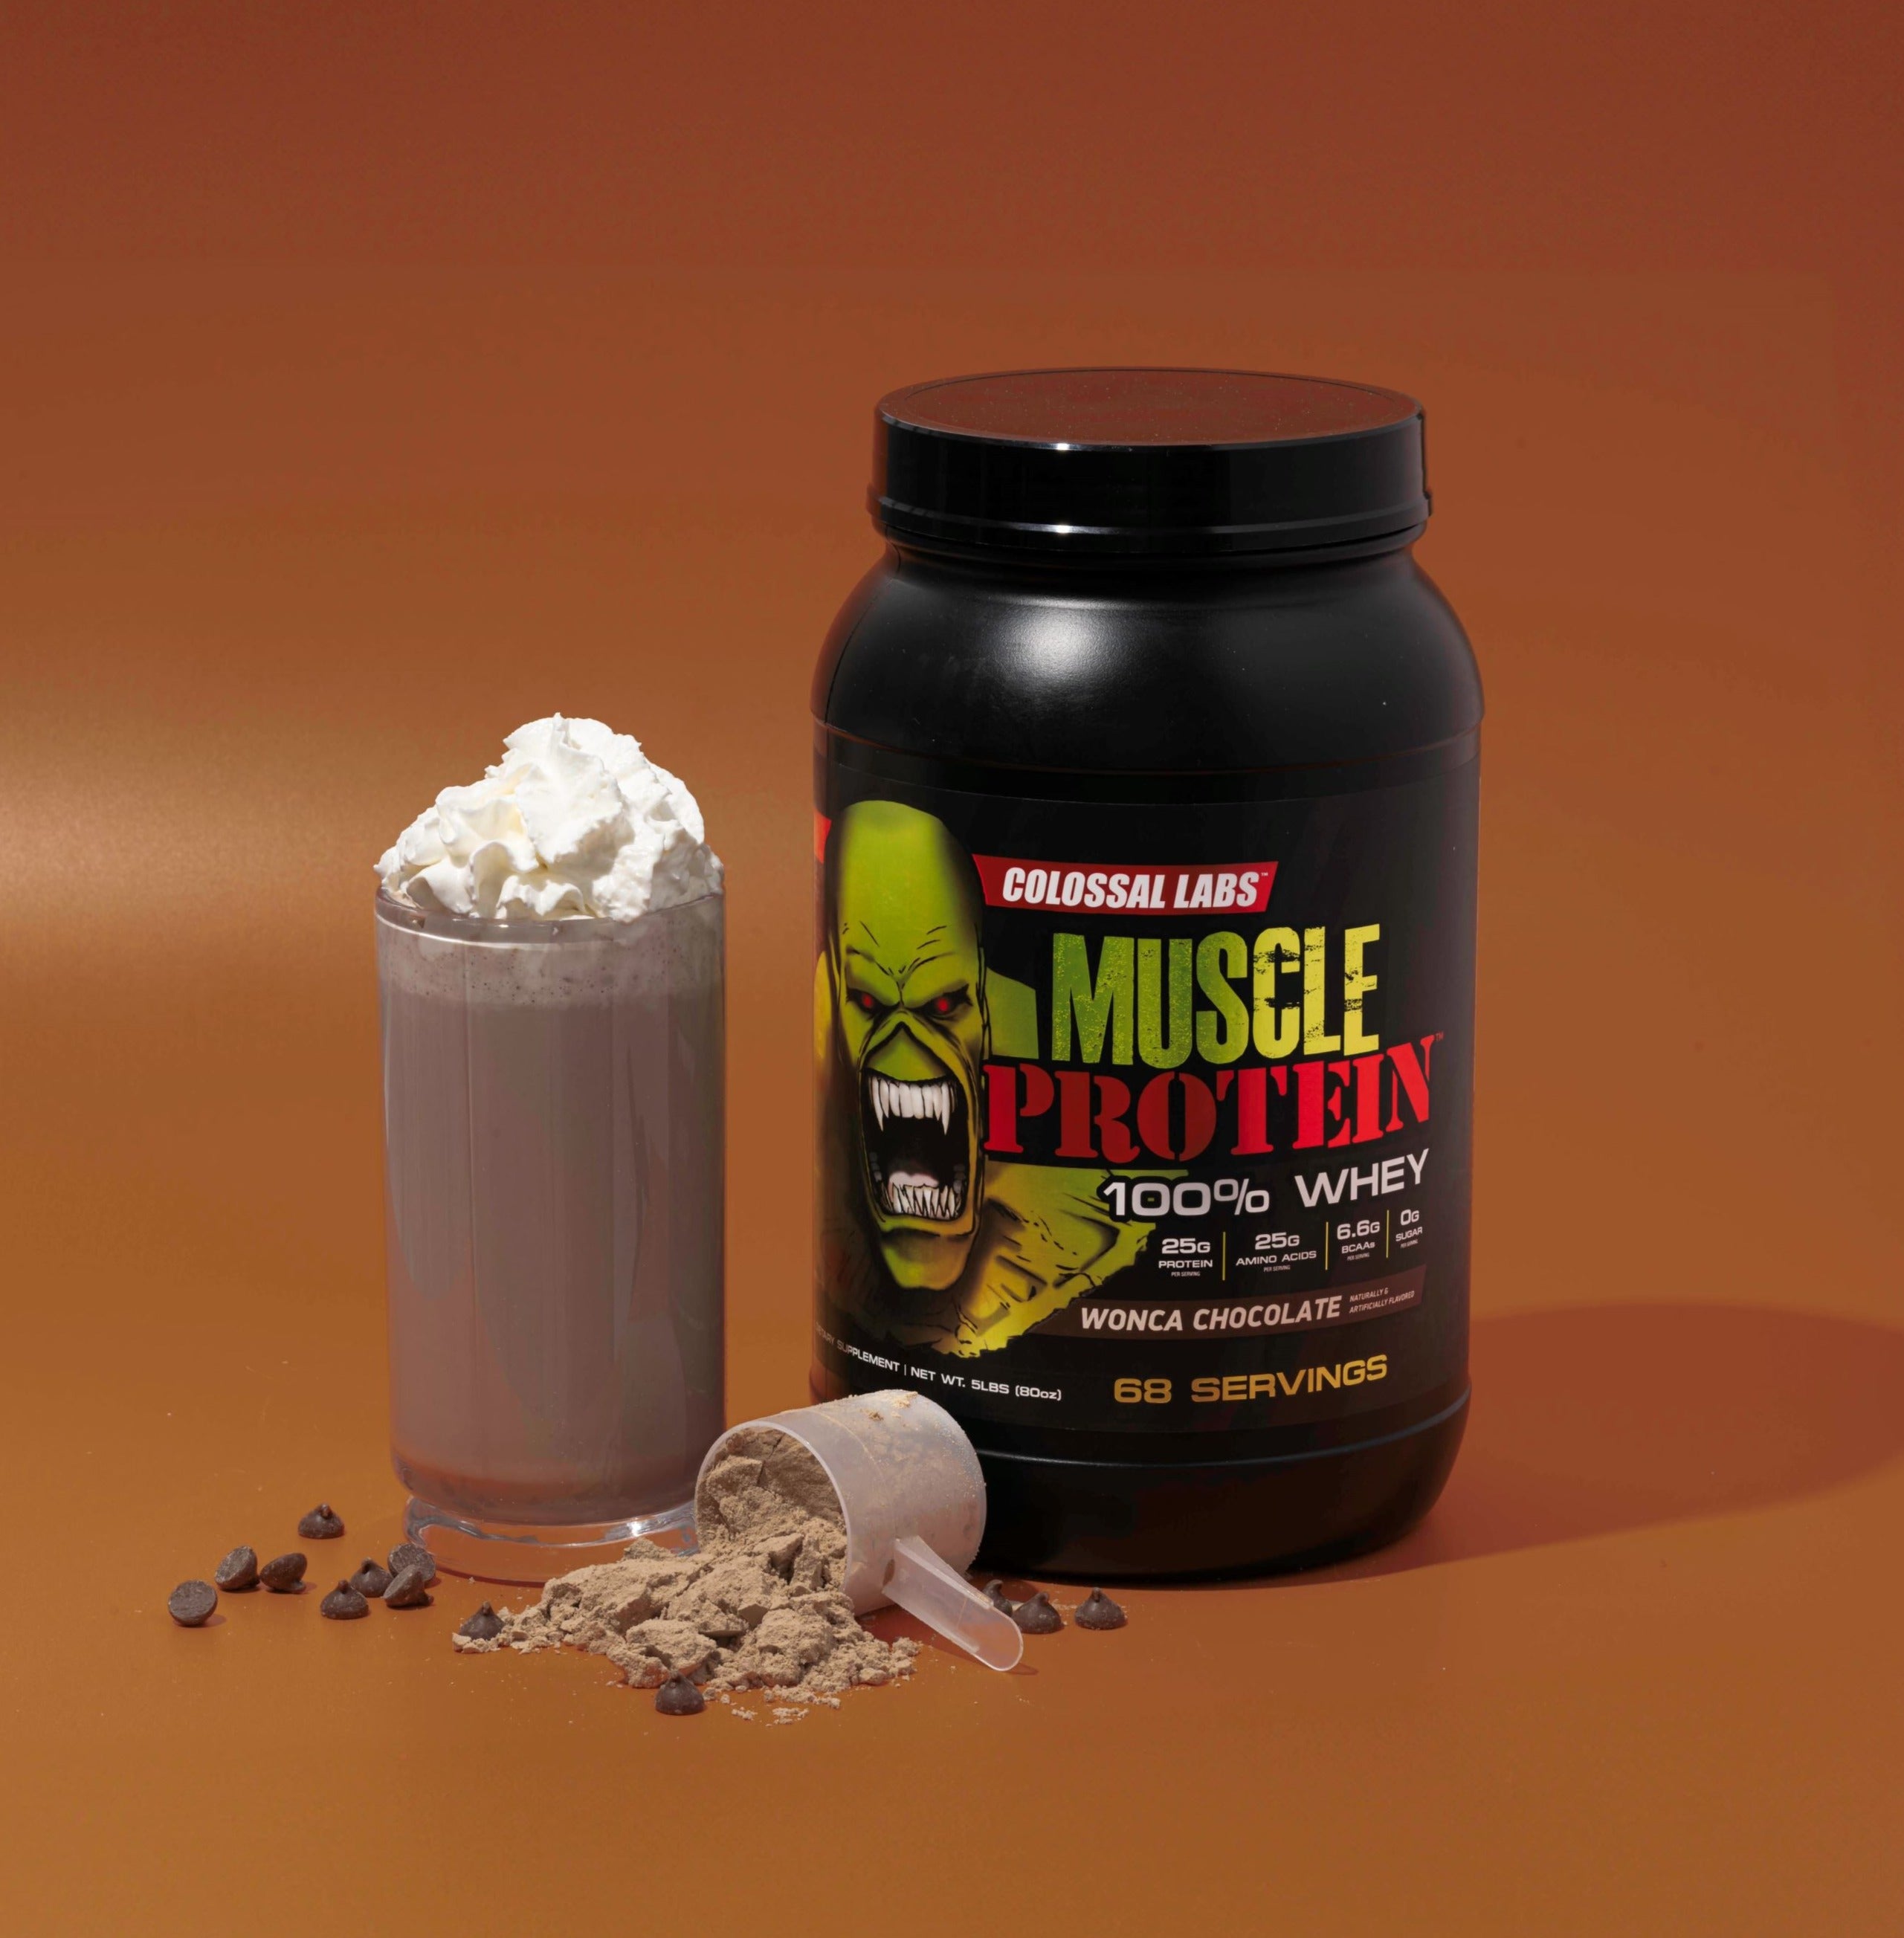 5 lbs - 100% Whey Muscle Protein